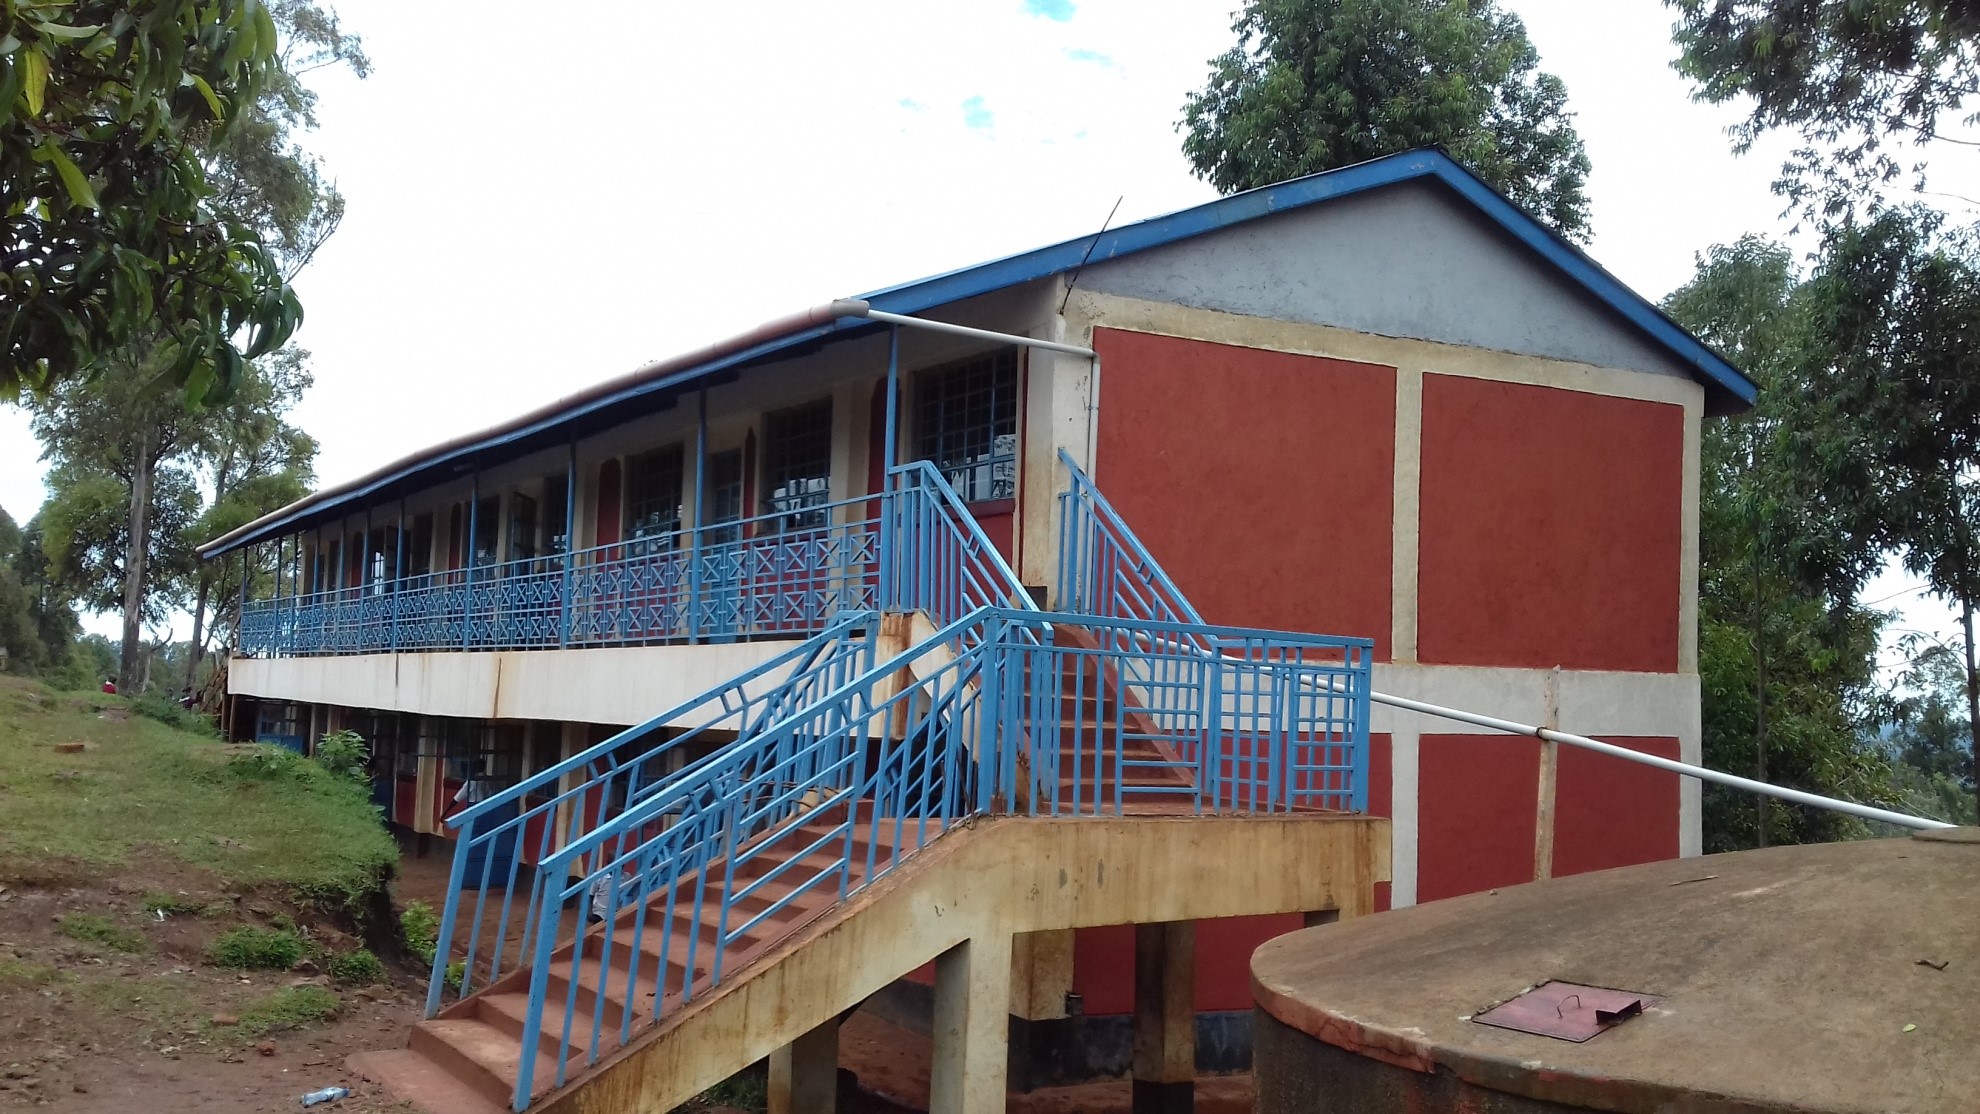 https://kitutuchache-south.ngcdf.go.ke/wp-content/uploads/2021/08/KITUTU-CHACHE-SOUTH-NG-CDF-PROJECT-8-CLASSROOMS-CONSTRUCTED-BY-NG-CDF-AT-KIANYABINGE-PRIMARY-SCHOOL.jpg